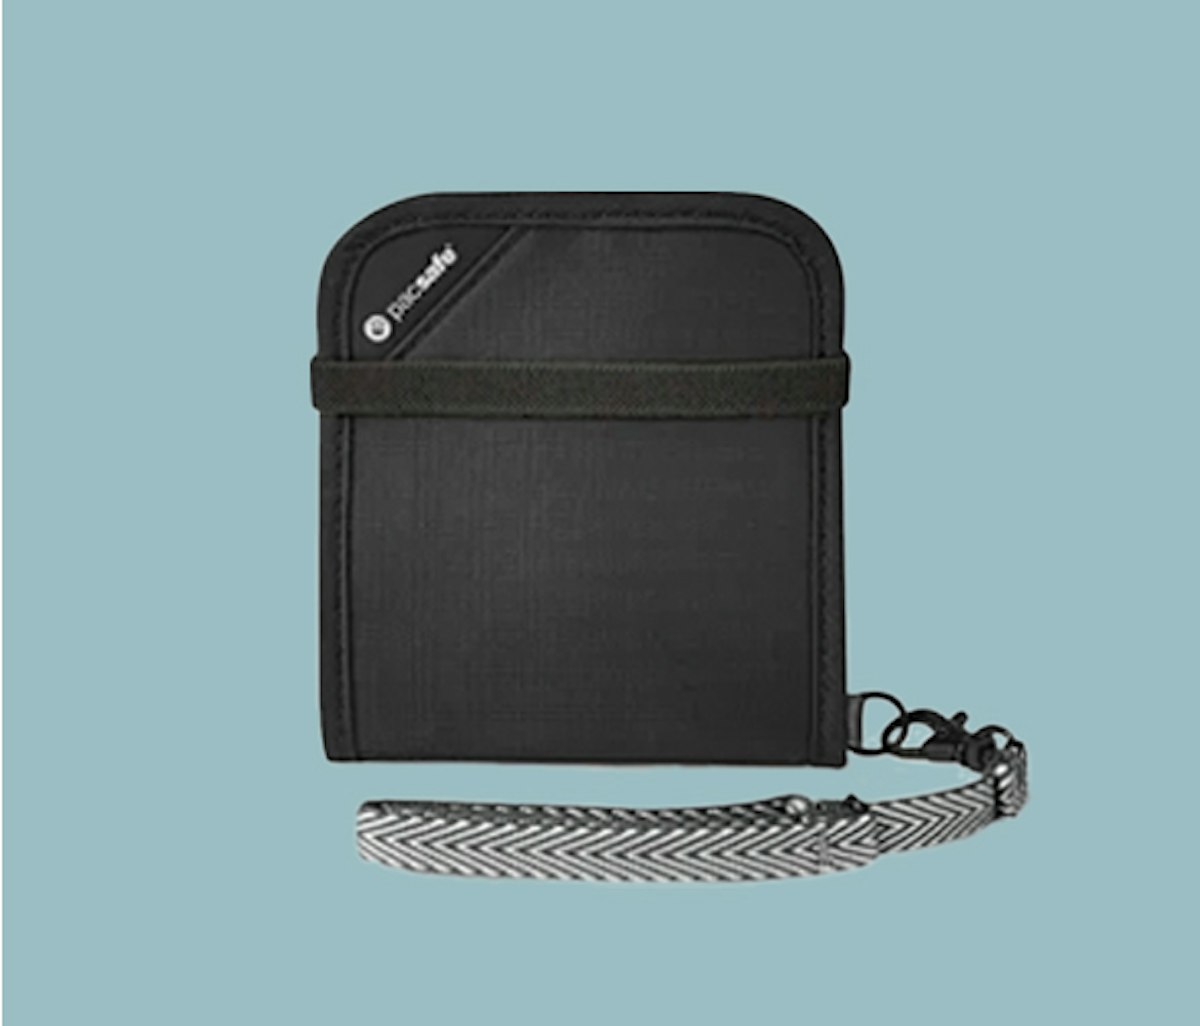 A black wallet with a chain attached to it.